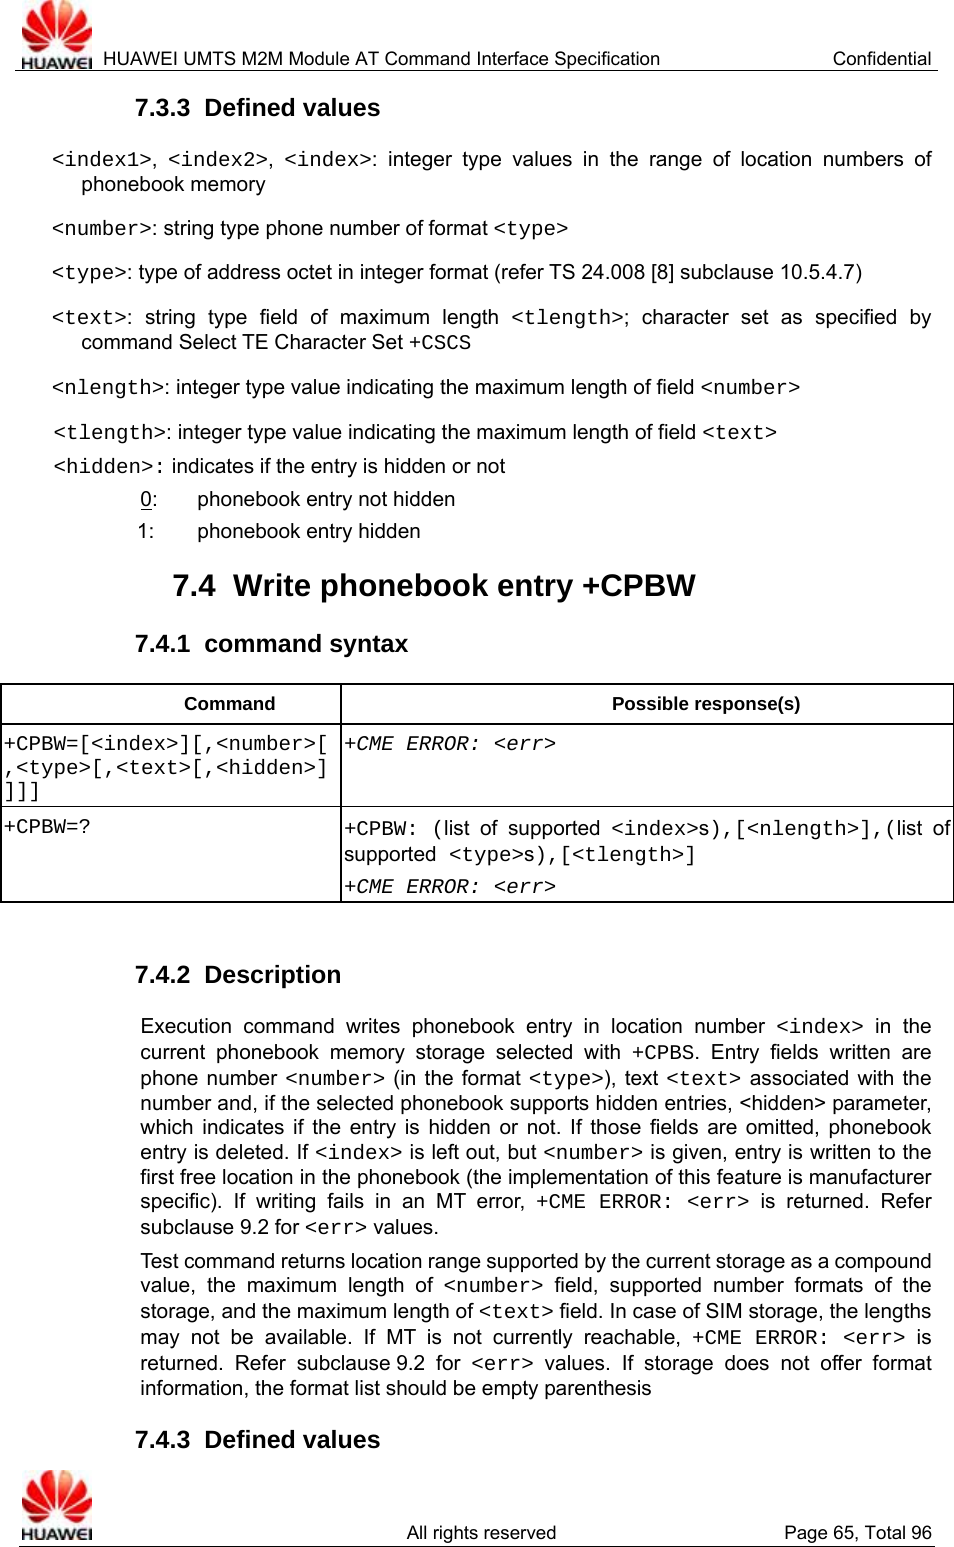  HUAWEI UMTS M2M Module AT Command Interface Specification  Confidential   All rights reserved  Page 65, Total 96 7.3.3  Defined values &lt;index1&gt;,  &lt;index2&gt;,  &lt;index&gt;: integer type values in the range of location numbers of phonebook memory &lt;number&gt;: string type phone number of format &lt;type&gt; &lt;type&gt;: type of address octet in integer format (refer TS 24.008 [8] subclause 10.5.4.7) &lt;text&gt;: string type field of maximum length &lt;tlength&gt;; character set as specified by command Select TE Character Set +CSCS &lt;nlength&gt;: integer type value indicating the maximum length of field &lt;number&gt; &lt;tlength&gt;: integer type value indicating the maximum length of field &lt;text&gt; &lt;hidden&gt;: indicates if the entry is hidden or not 0:  phonebook entry not hidden 1:  phonebook entry hidden 7.4  Write phonebook entry +CPBW 7.4.1  command syntax Command Possible response(s) +CPBW=[&lt;index&gt;][,&lt;number&gt;[,&lt;type&gt;[,&lt;text&gt;[,&lt;hidden&gt;]]]] +CME ERROR: &lt;err&gt; +CPBW=? +CPBW: (list of supported &lt;index&gt;s),[&lt;nlength&gt;],(list of supported &lt;type&gt;s),[&lt;tlength&gt;] +CME ERROR: &lt;err&gt;  7.4.2  Description Execution command writes phonebook entry in location number &lt;index&gt; in the current phonebook memory storage selected with +CPBS. Entry fields written are phone number &lt;number&gt; (in the format &lt;type&gt;), text &lt;text&gt; associated with the number and, if the selected phonebook supports hidden entries, &lt;hidden&gt; parameter, which indicates if the entry is hidden or not. If those fields are omitted, phonebook entry is deleted. If &lt;index&gt; is left out, but &lt;number&gt; is given, entry is written to the first free location in the phonebook (the implementation of this feature is manufacturer specific). If writing fails in an MT error, +CME ERROR: &lt;err&gt; is returned. Refer subclause 9.2 for &lt;err&gt; values. Test command returns location range supported by the current storage as a compound value, the maximum length of &lt;number&gt; field, supported number formats of the storage, and the maximum length of &lt;text&gt; field. In case of SIM storage, the lengths may not be available. If MT is not currently reachable, +CME ERROR: &lt;err&gt; is returned. Refer subclause 9.2 for &lt;err&gt; values. If storage does not offer format information, the format list should be empty parenthesis 7.4.3  Defined values 